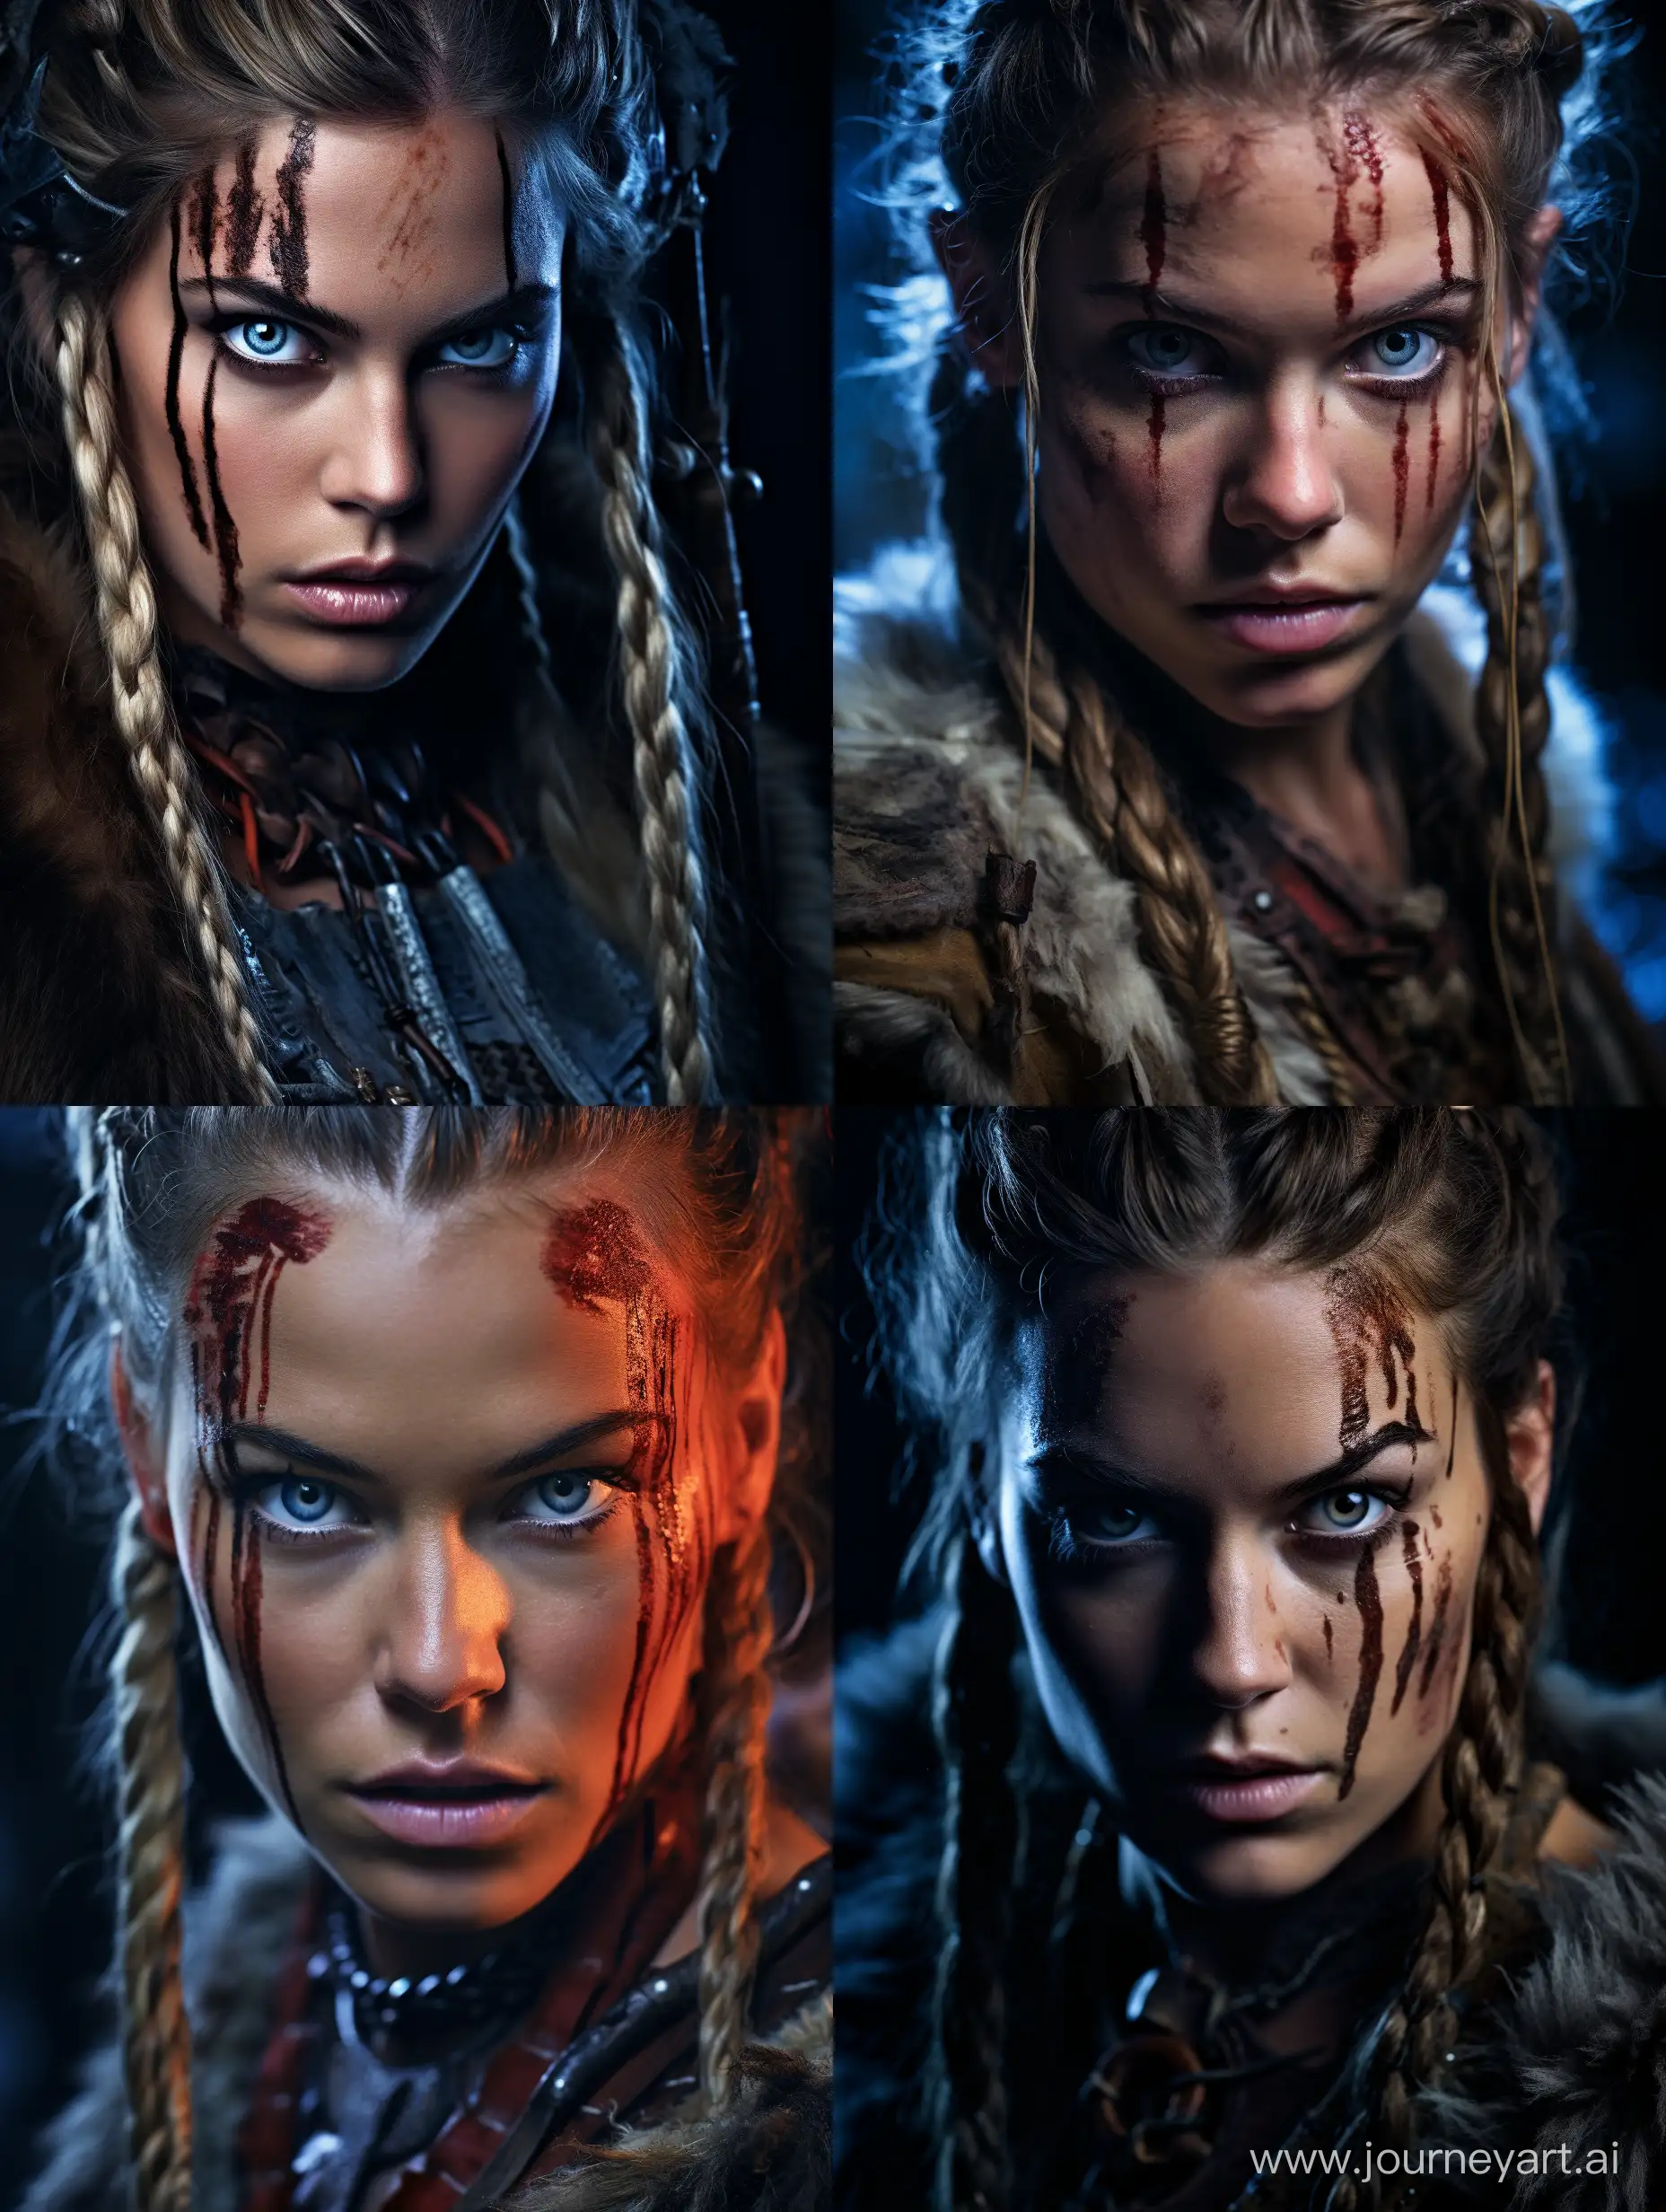 Dramatic-Cinematic-Portrait-of-a-Viking-Warrior-Woman-with-Intense-Stare-and-Warrior-Face-Paintings